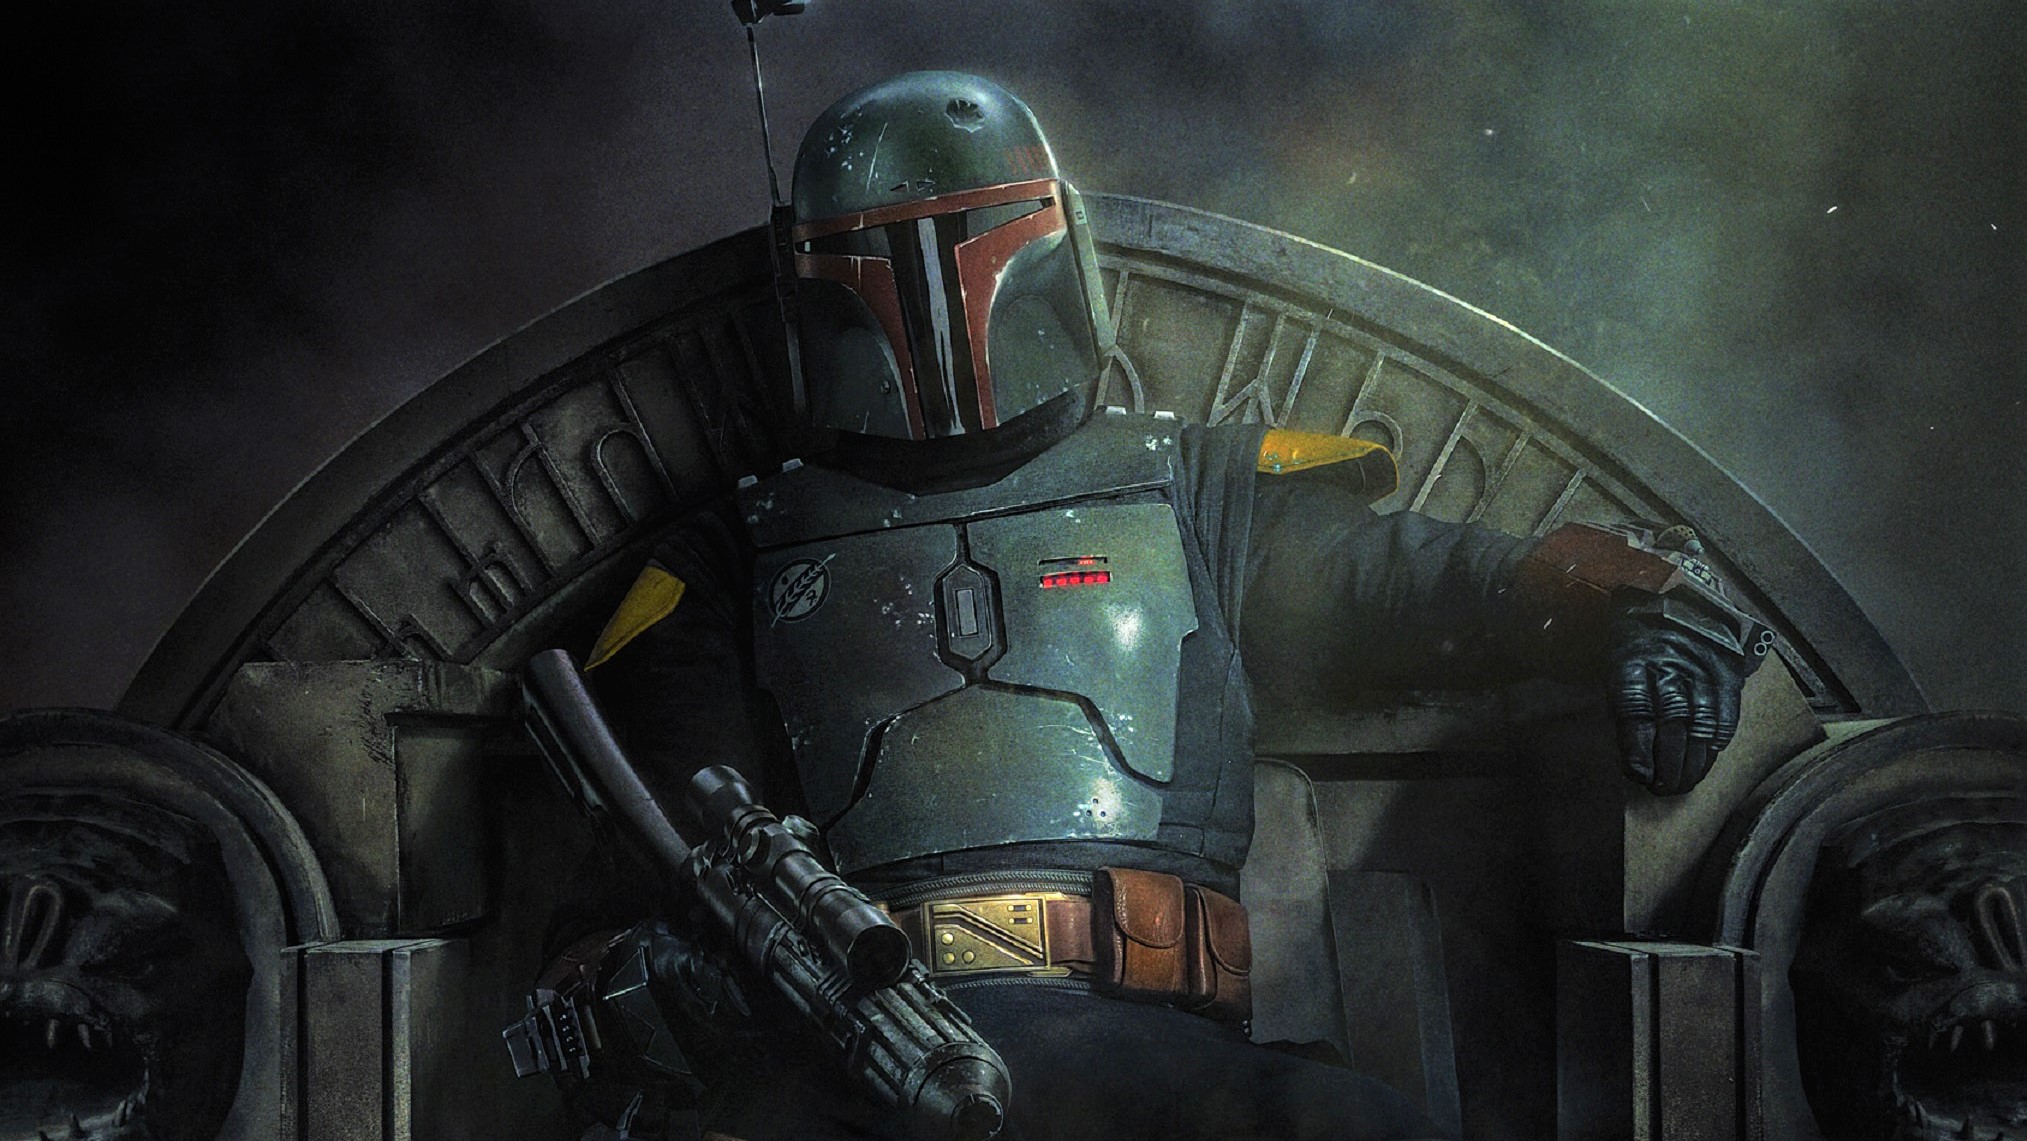 The Book Of Boba Fett 2021 Wallpapers